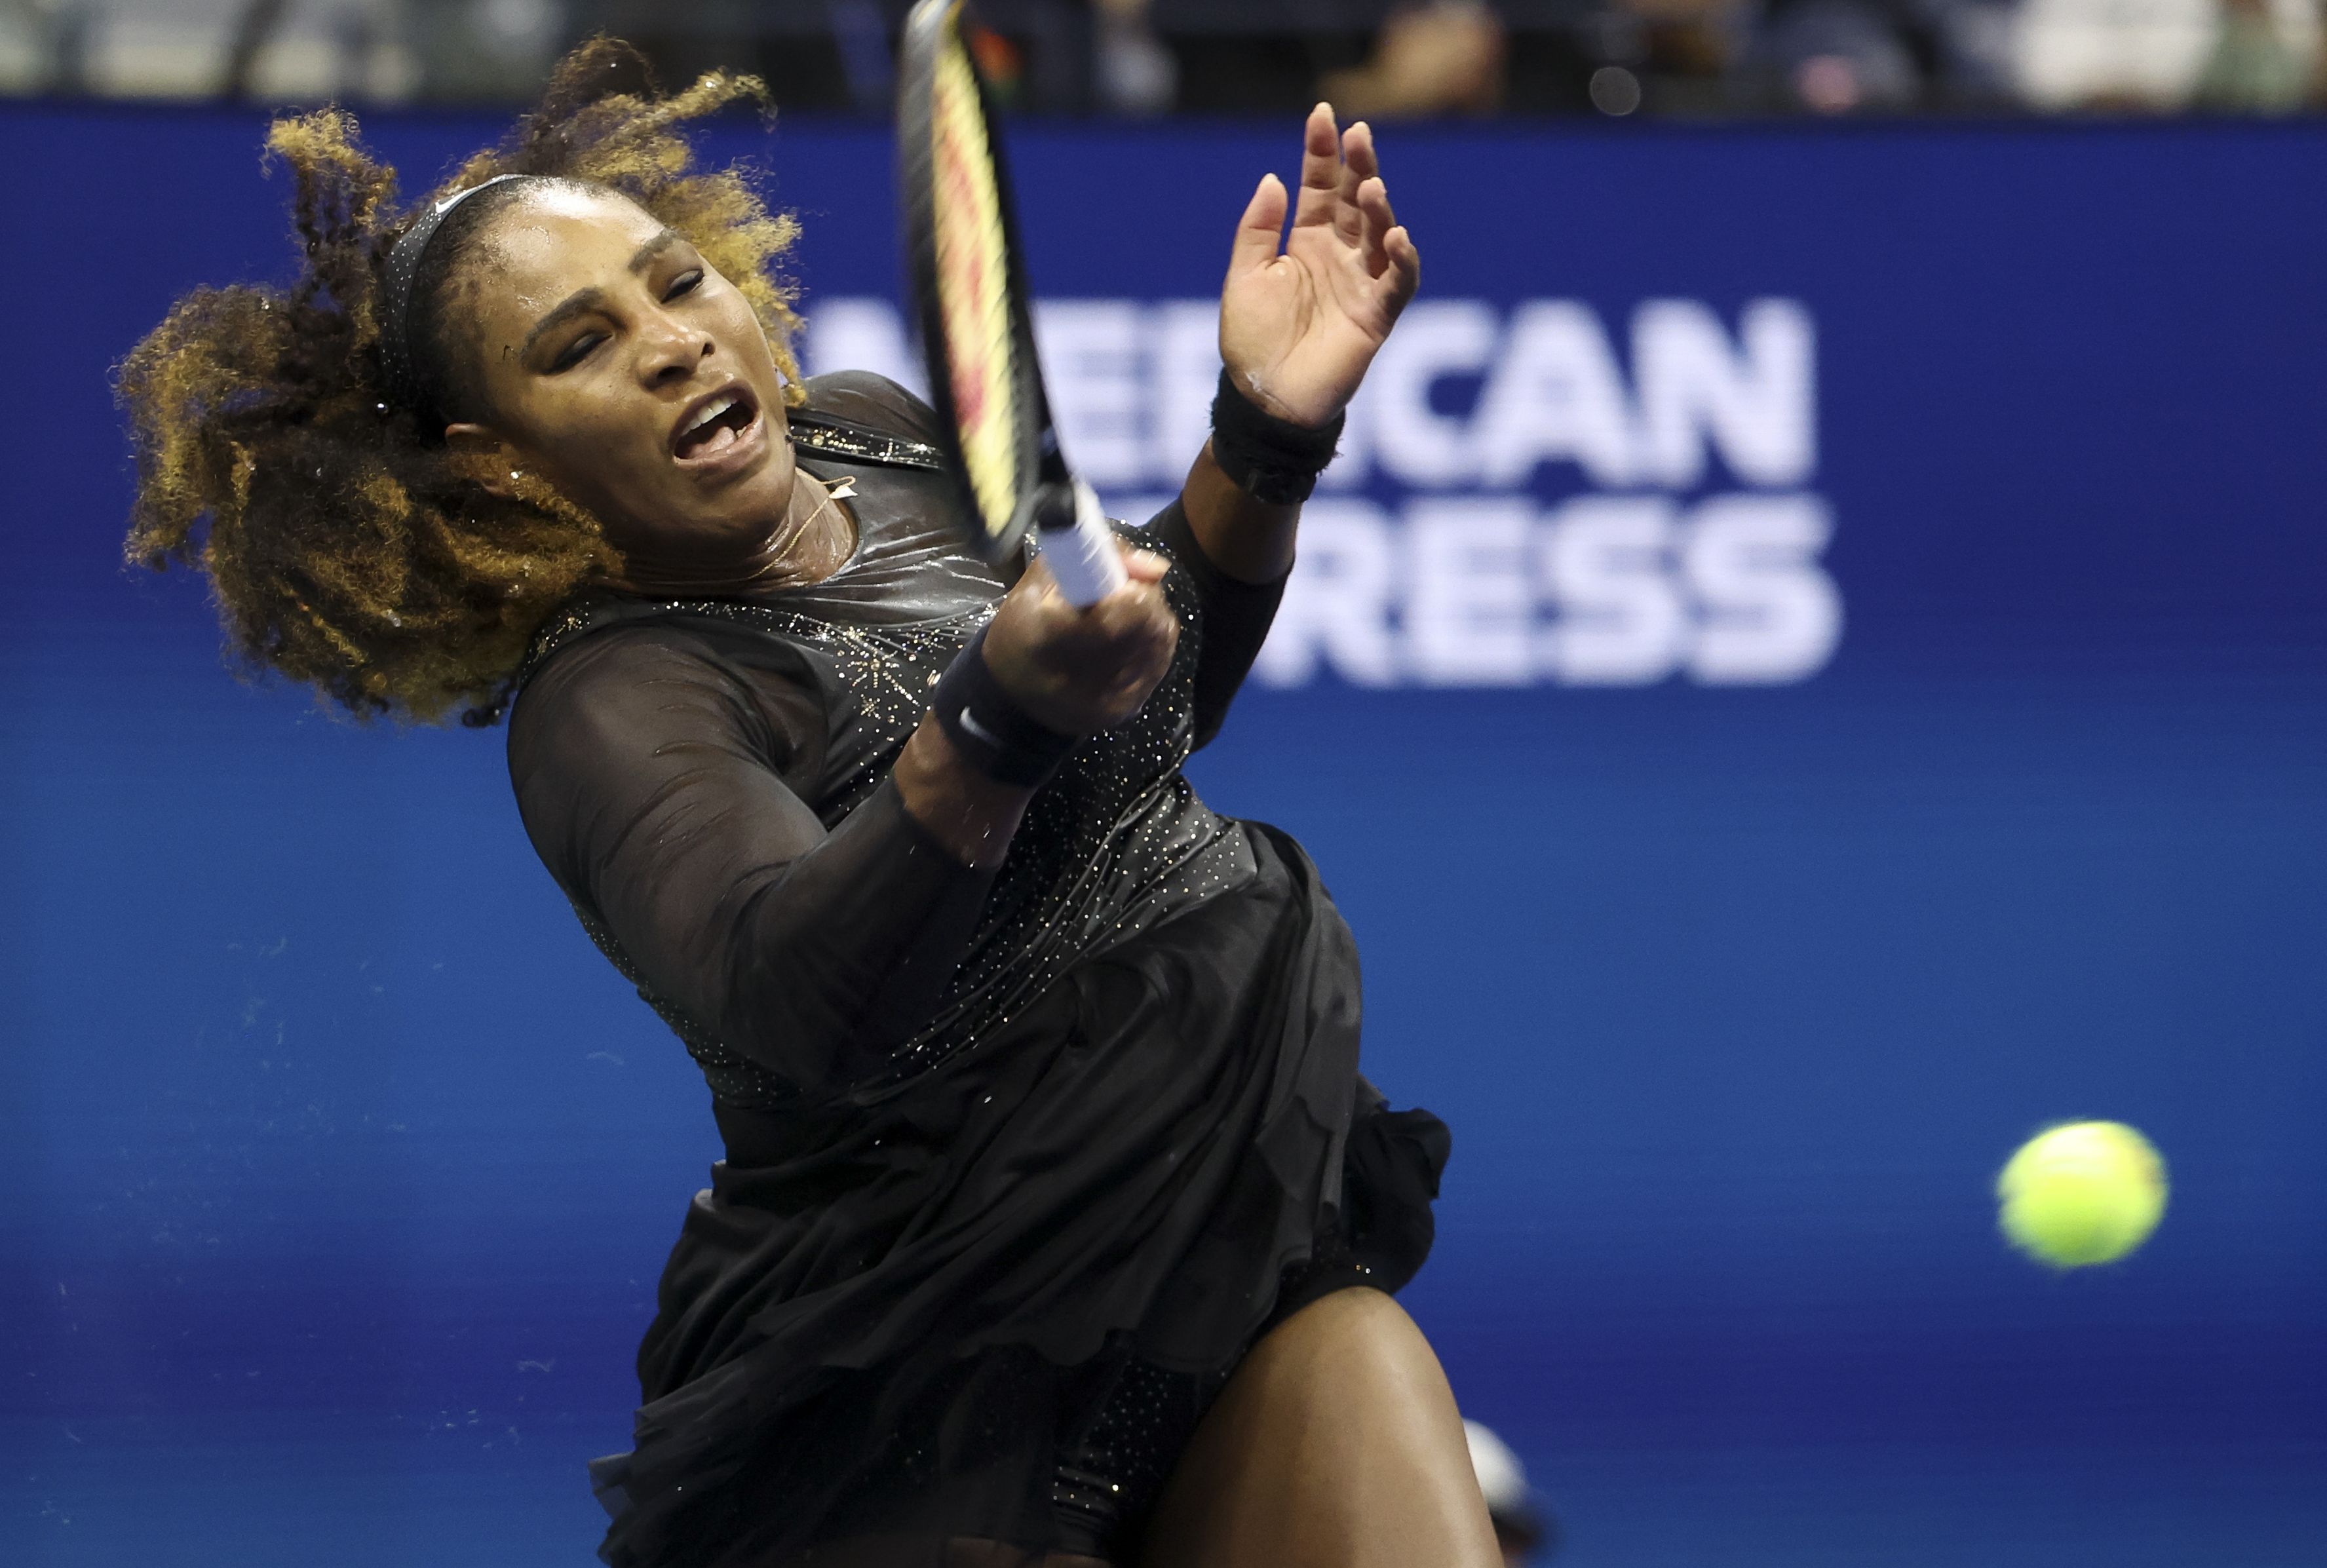 How To Watch Serena Williams Final Matches At The 2022 U.S